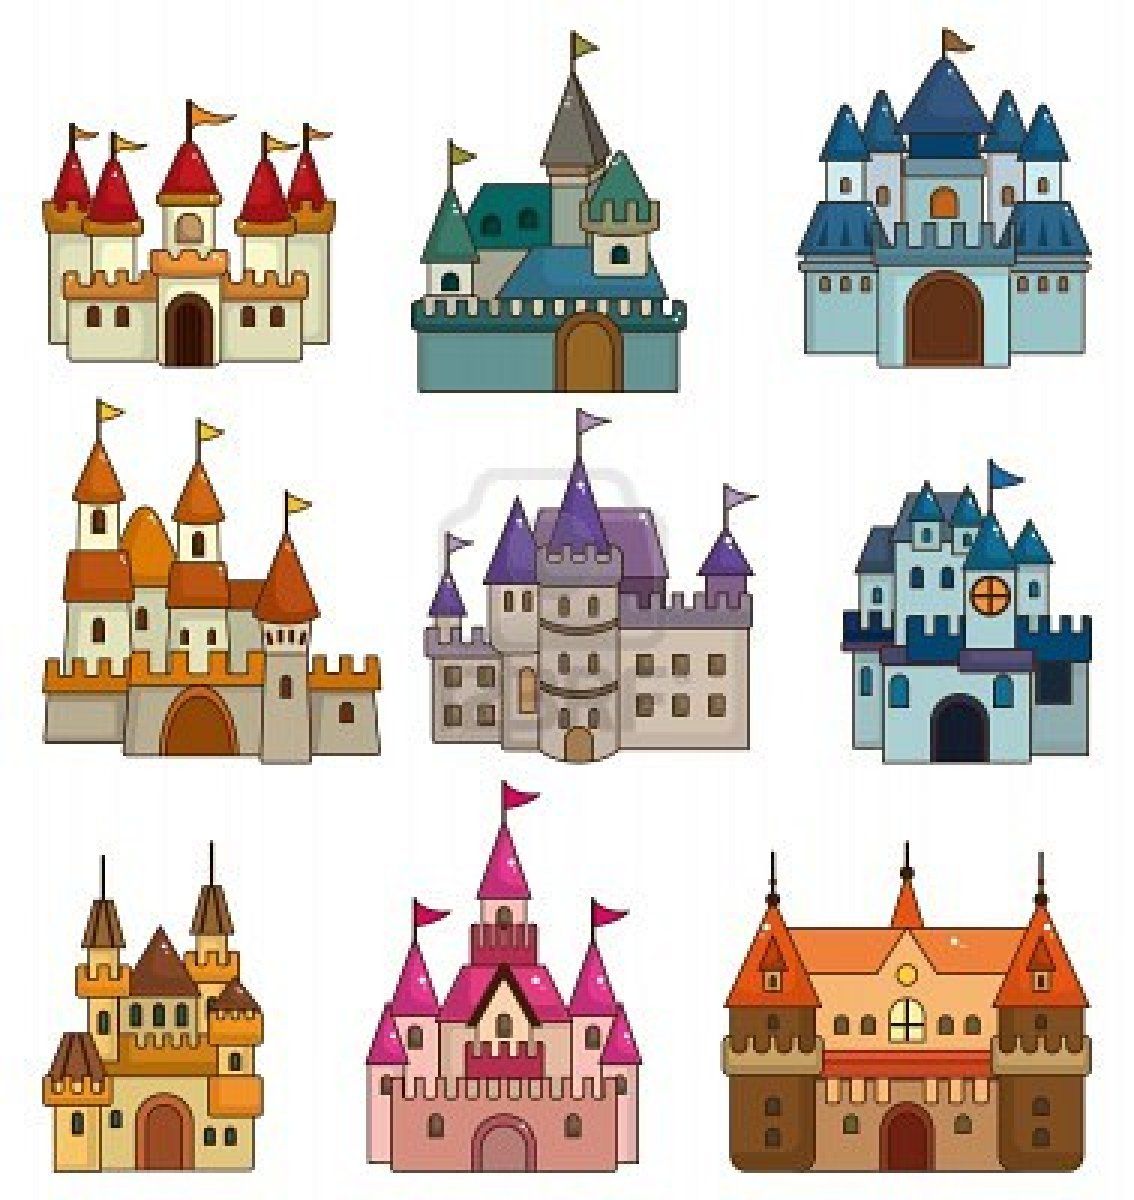 fairytale clipart medieval cathedral